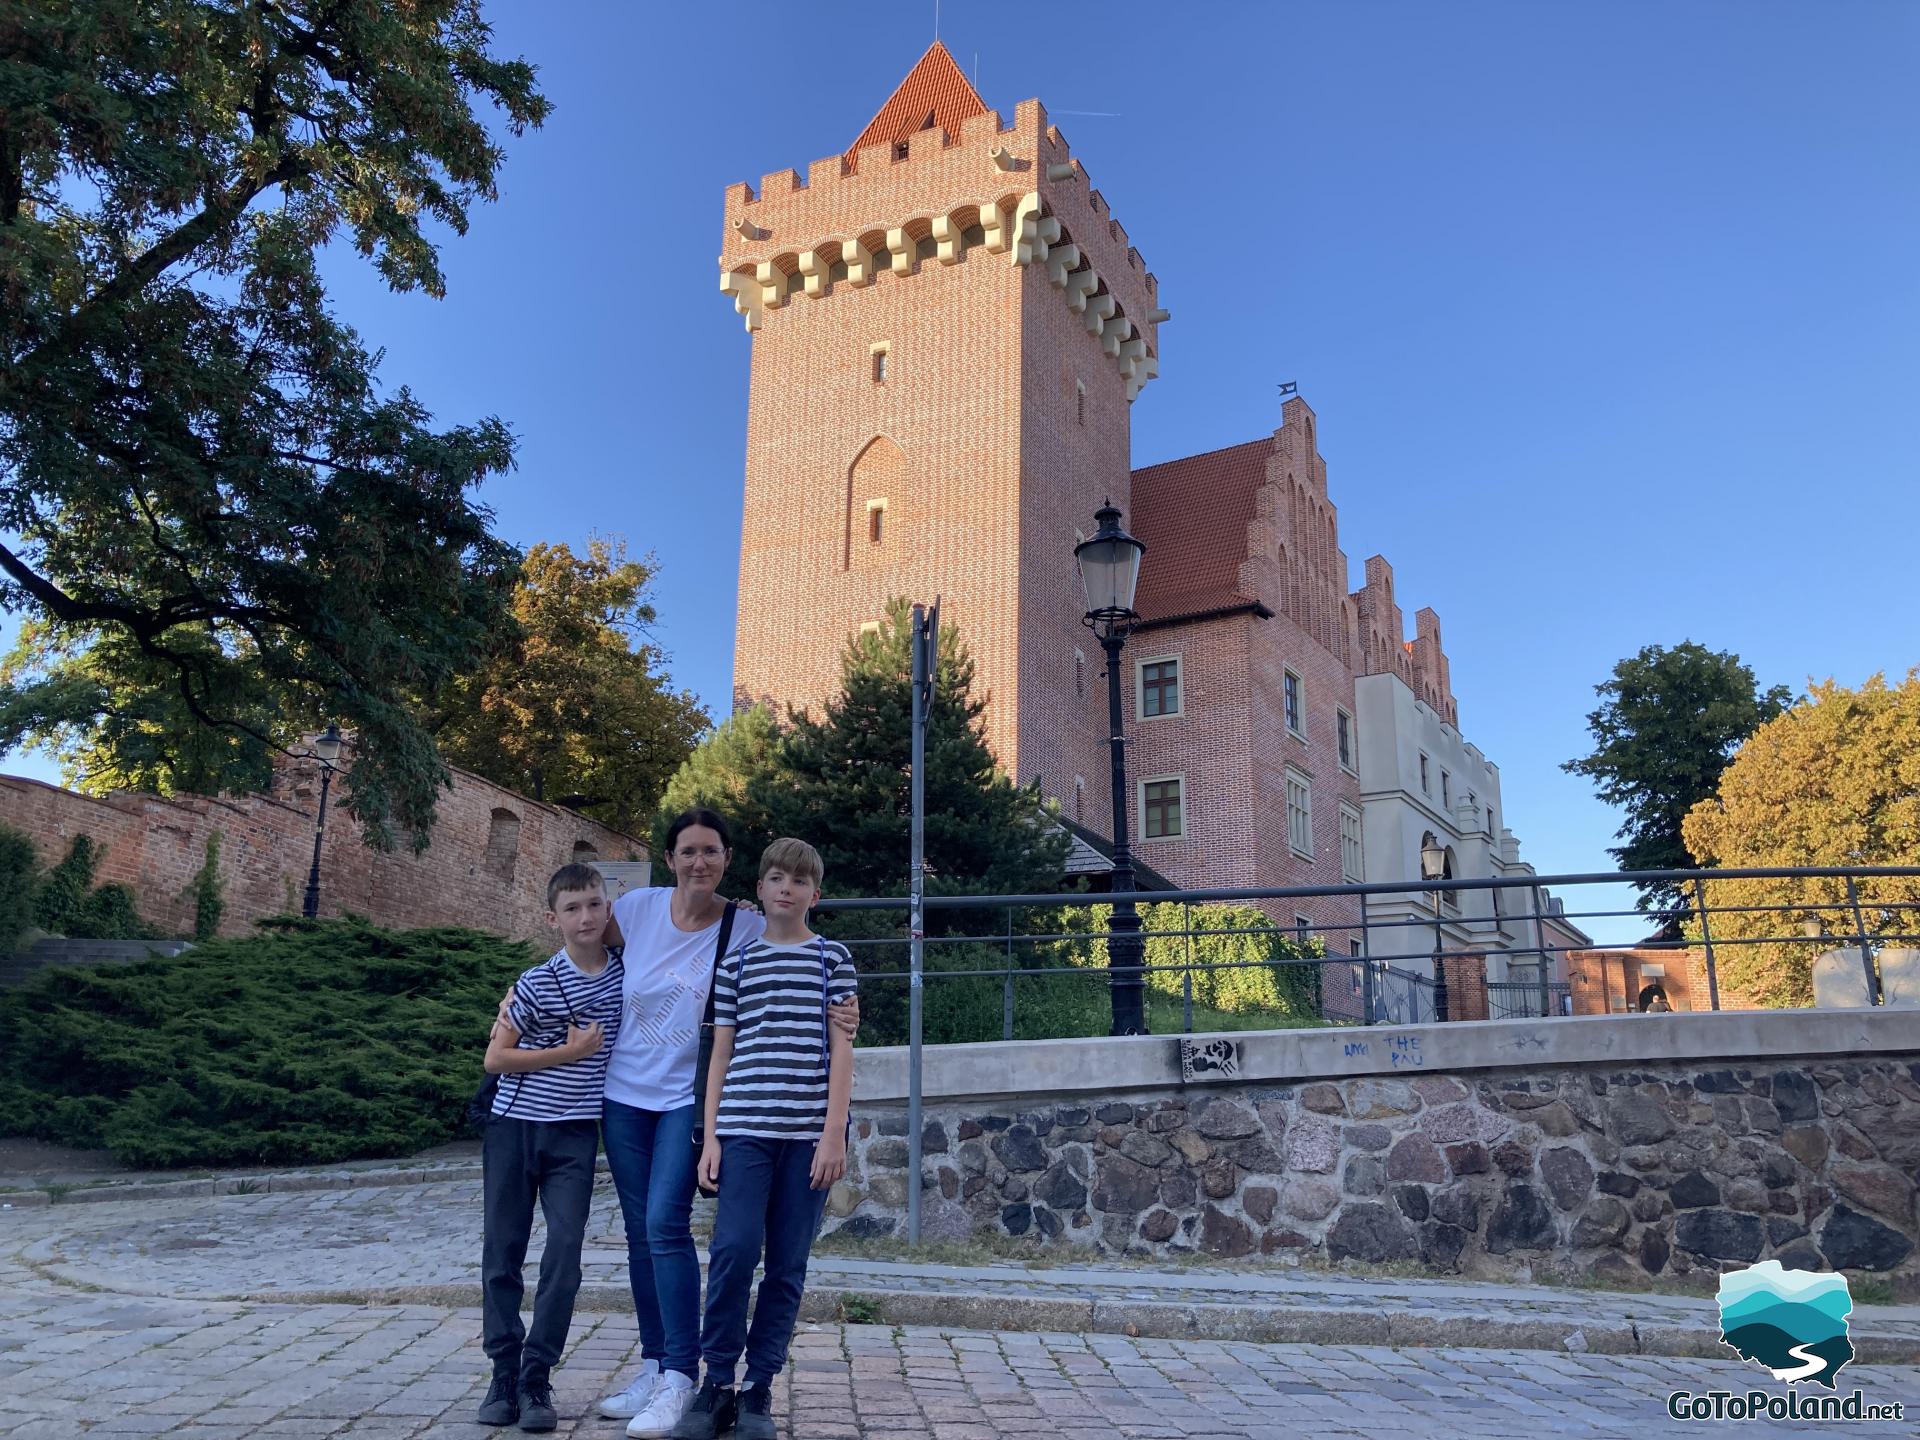 A woman and two boys are posing for a photo, behind them is a tower belonging to a former castle